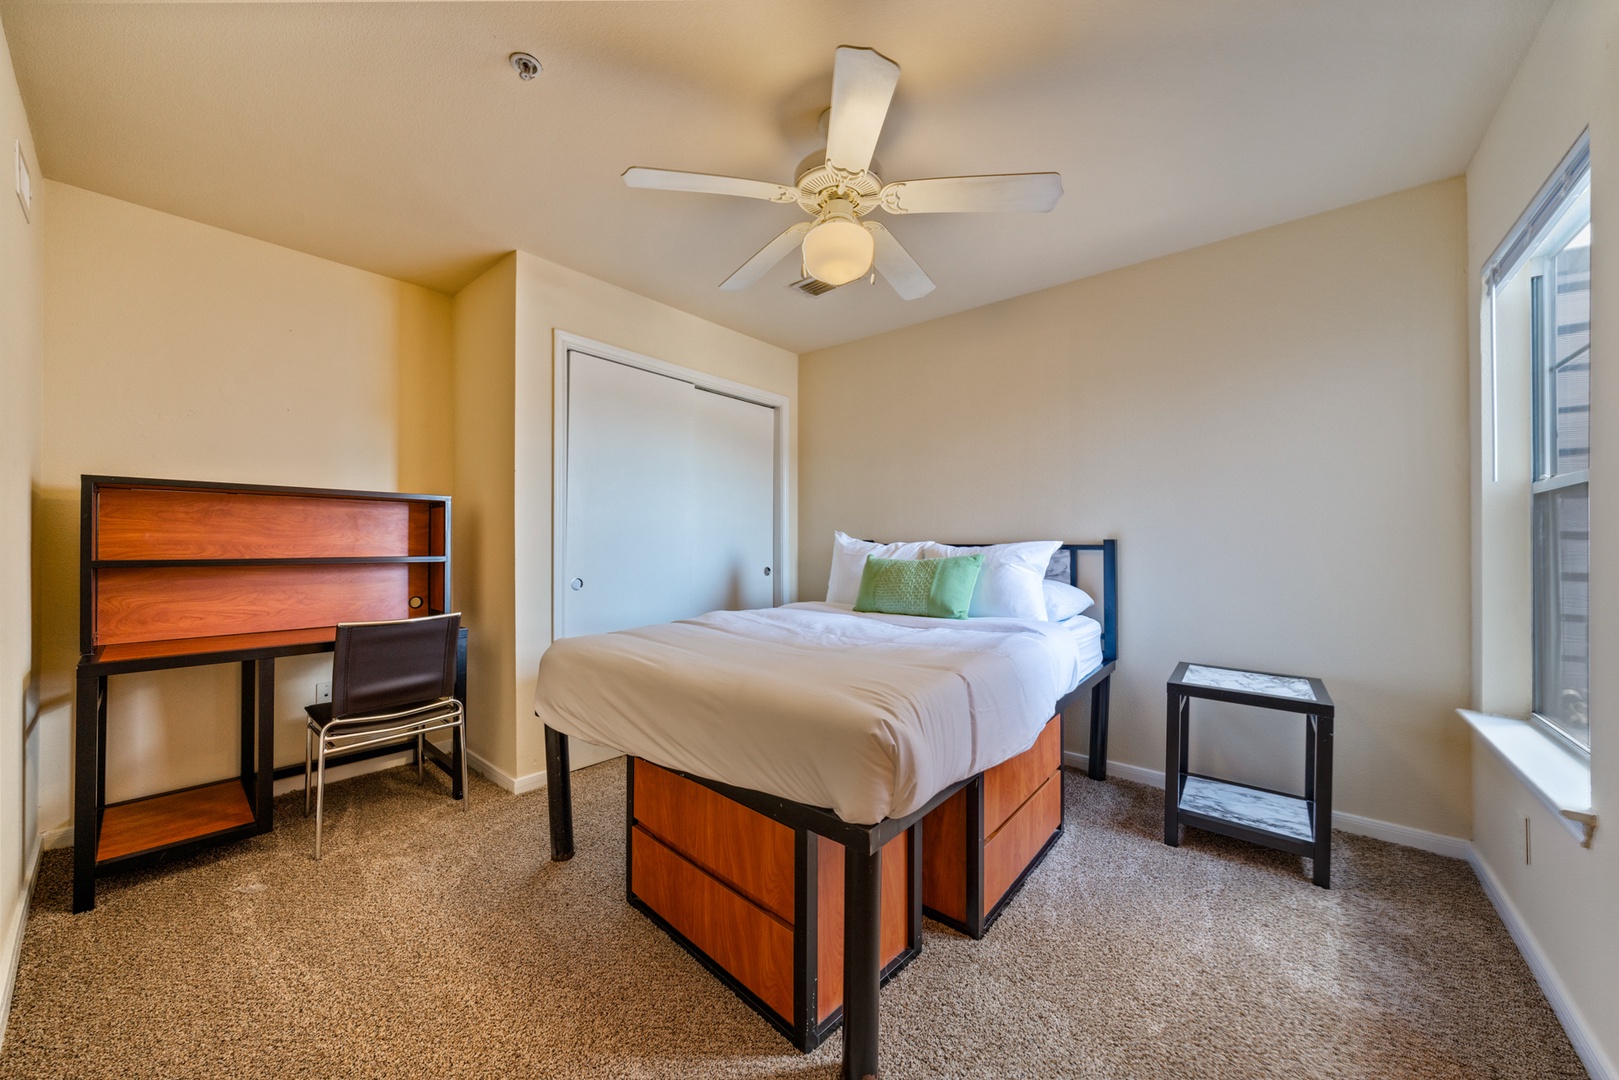 rwhere to stay in Corpus Christi